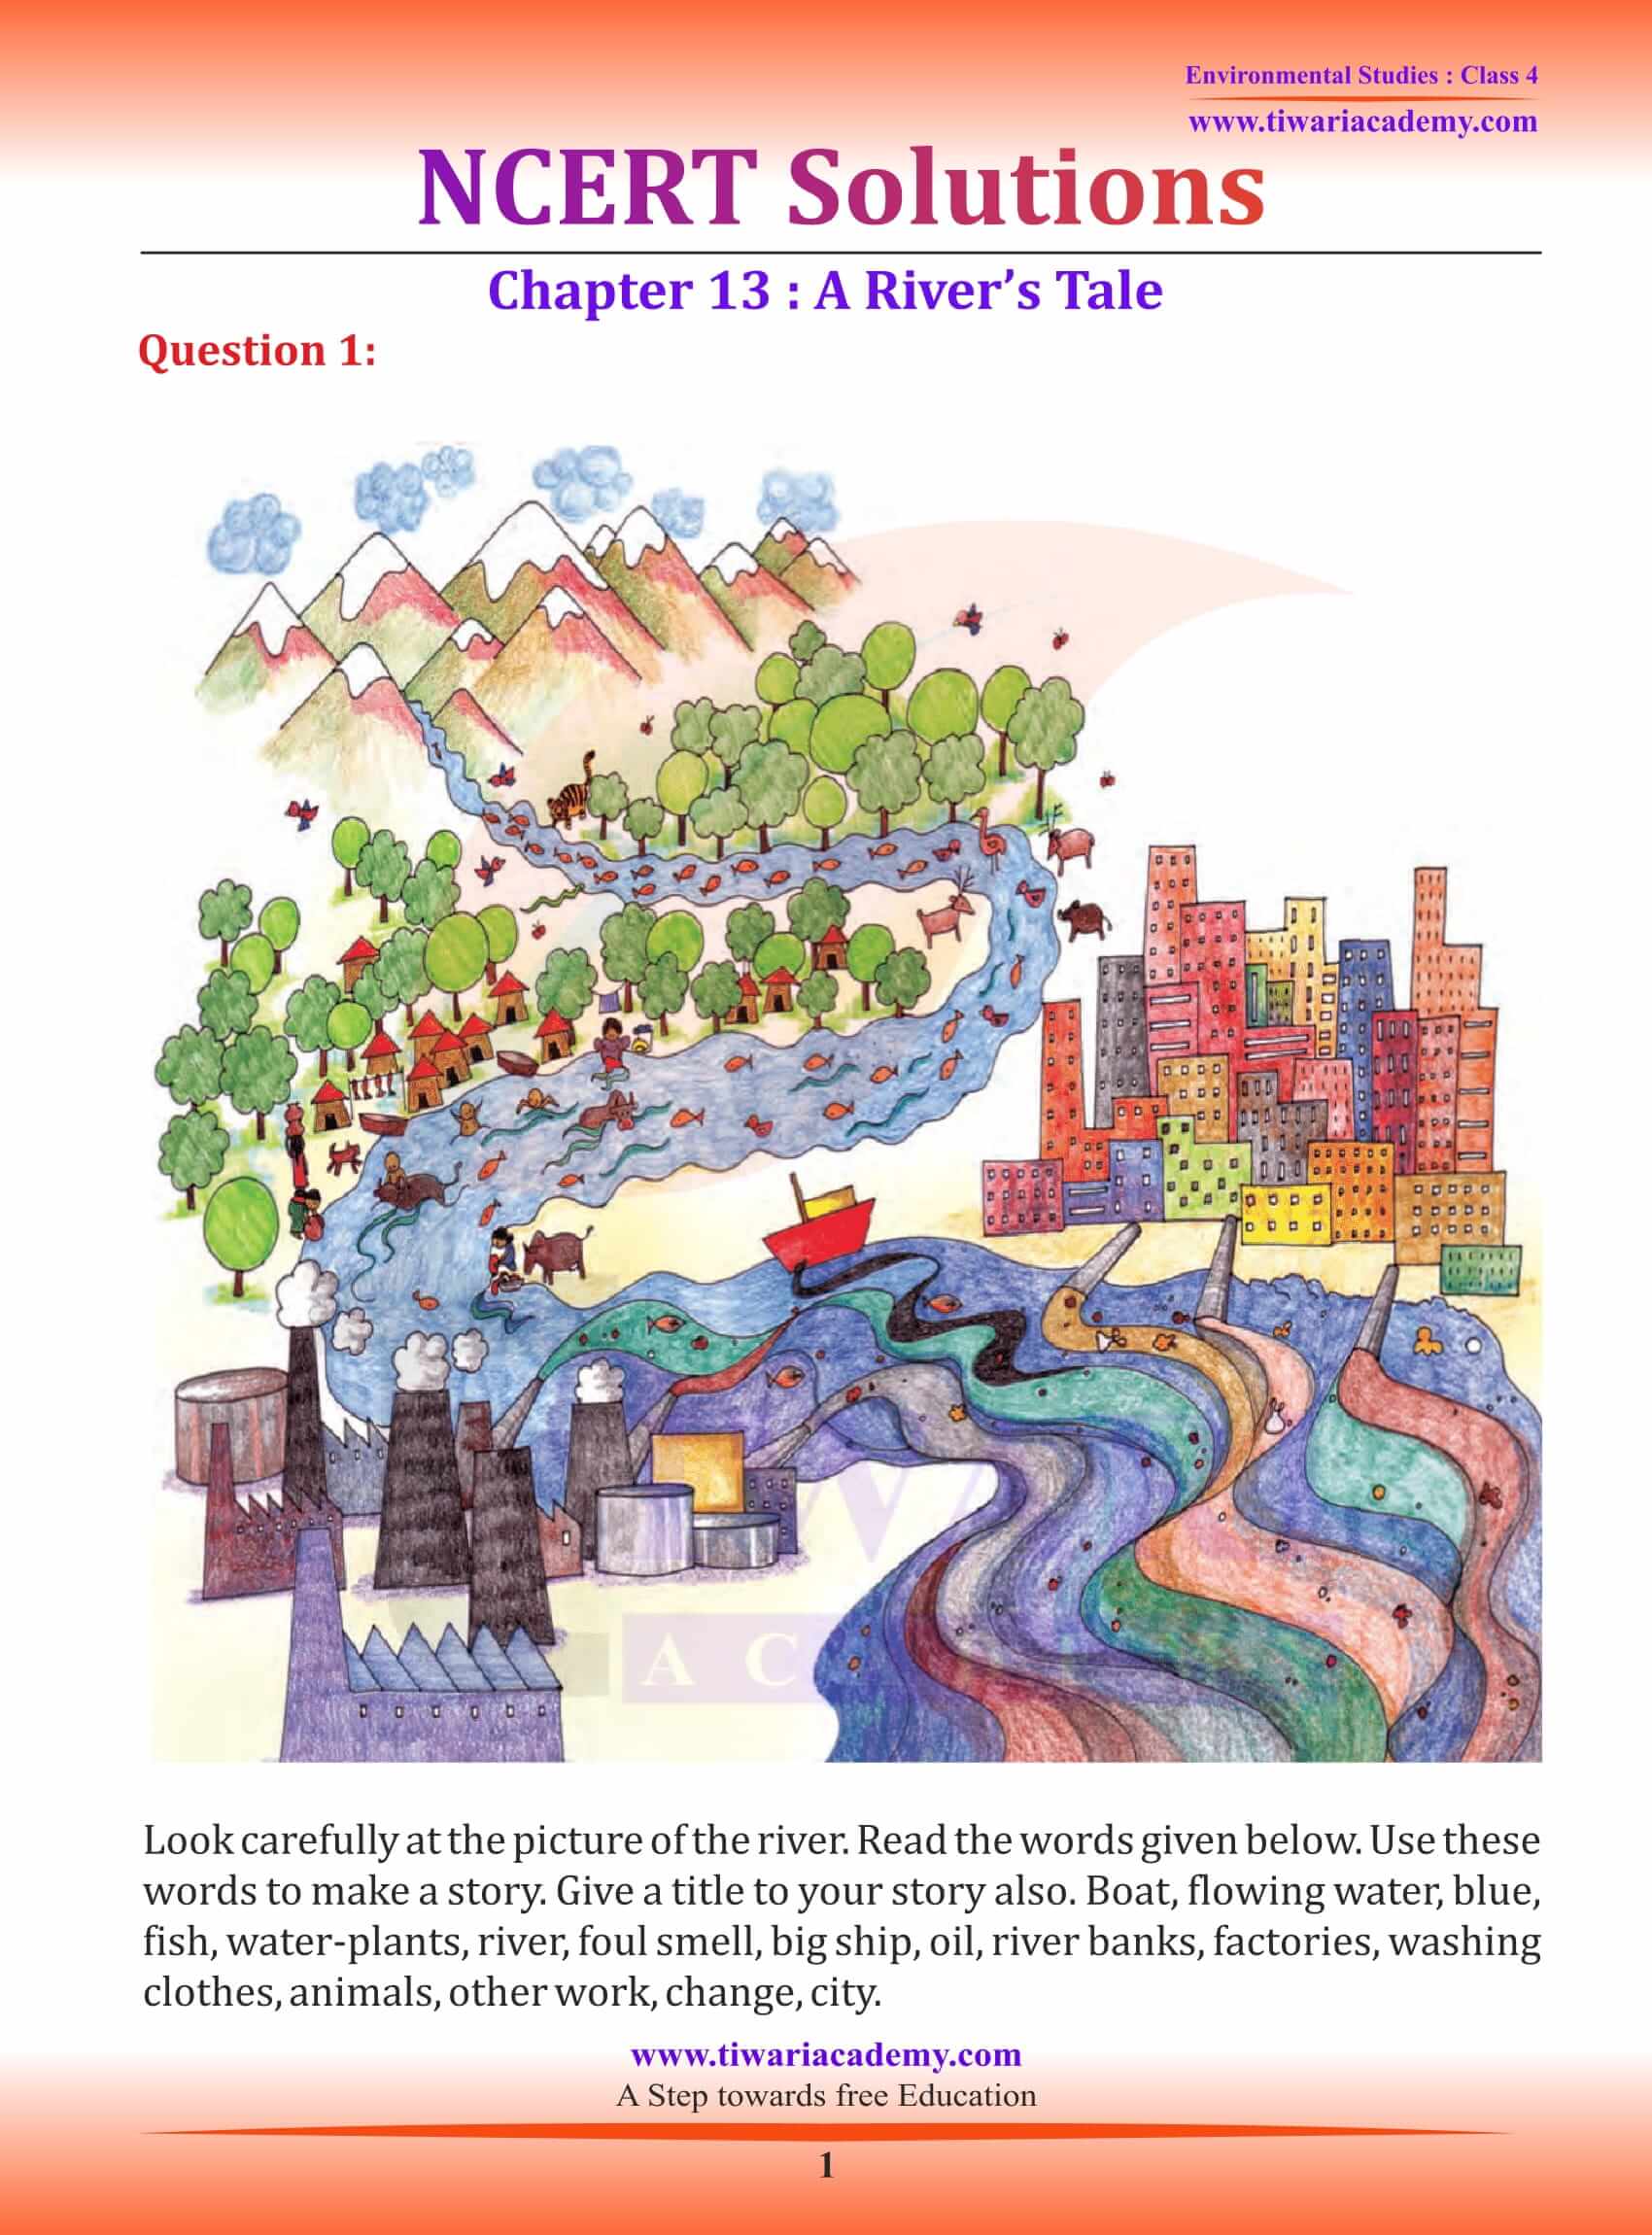 NCERT Solutions for Class 4 EVS Chapter 13 A River’s Tale